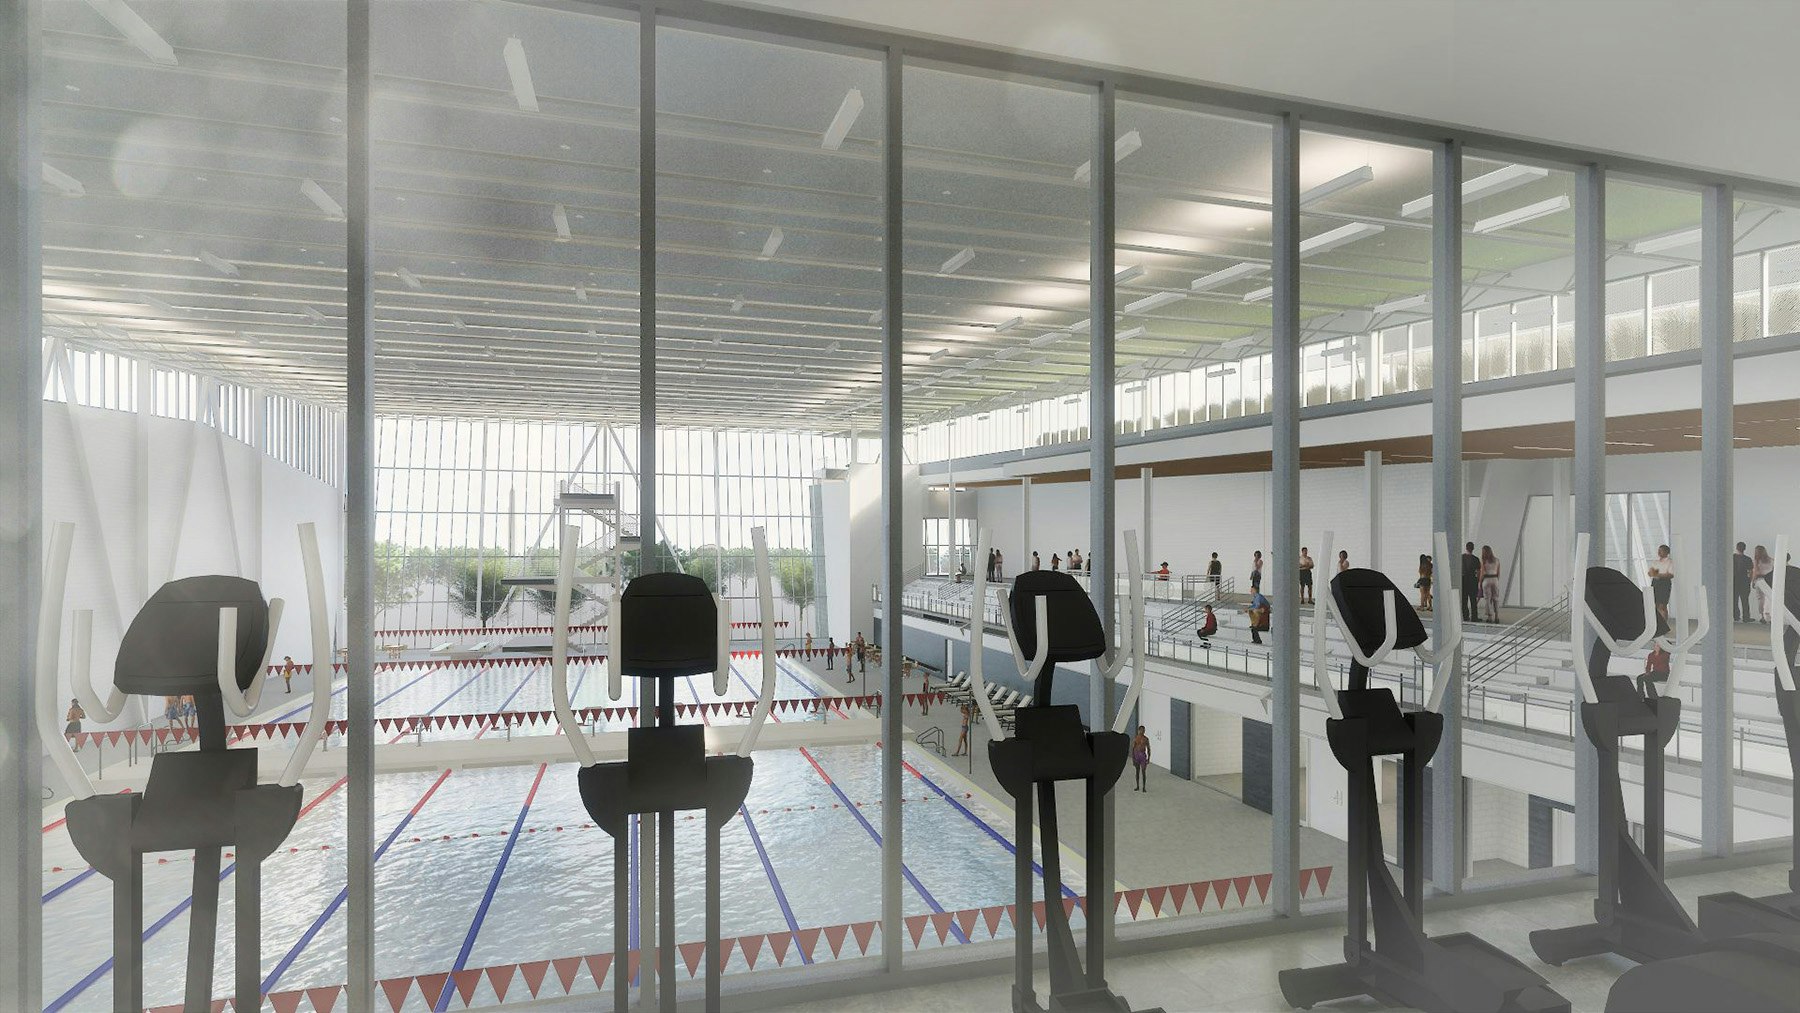 This facility will feature a 50‐meter pool with a 500-seat bleacher, a combination of play and teaching pool, approximately 10,000 SF of health and fitness space, administrative offices, and community rooms.